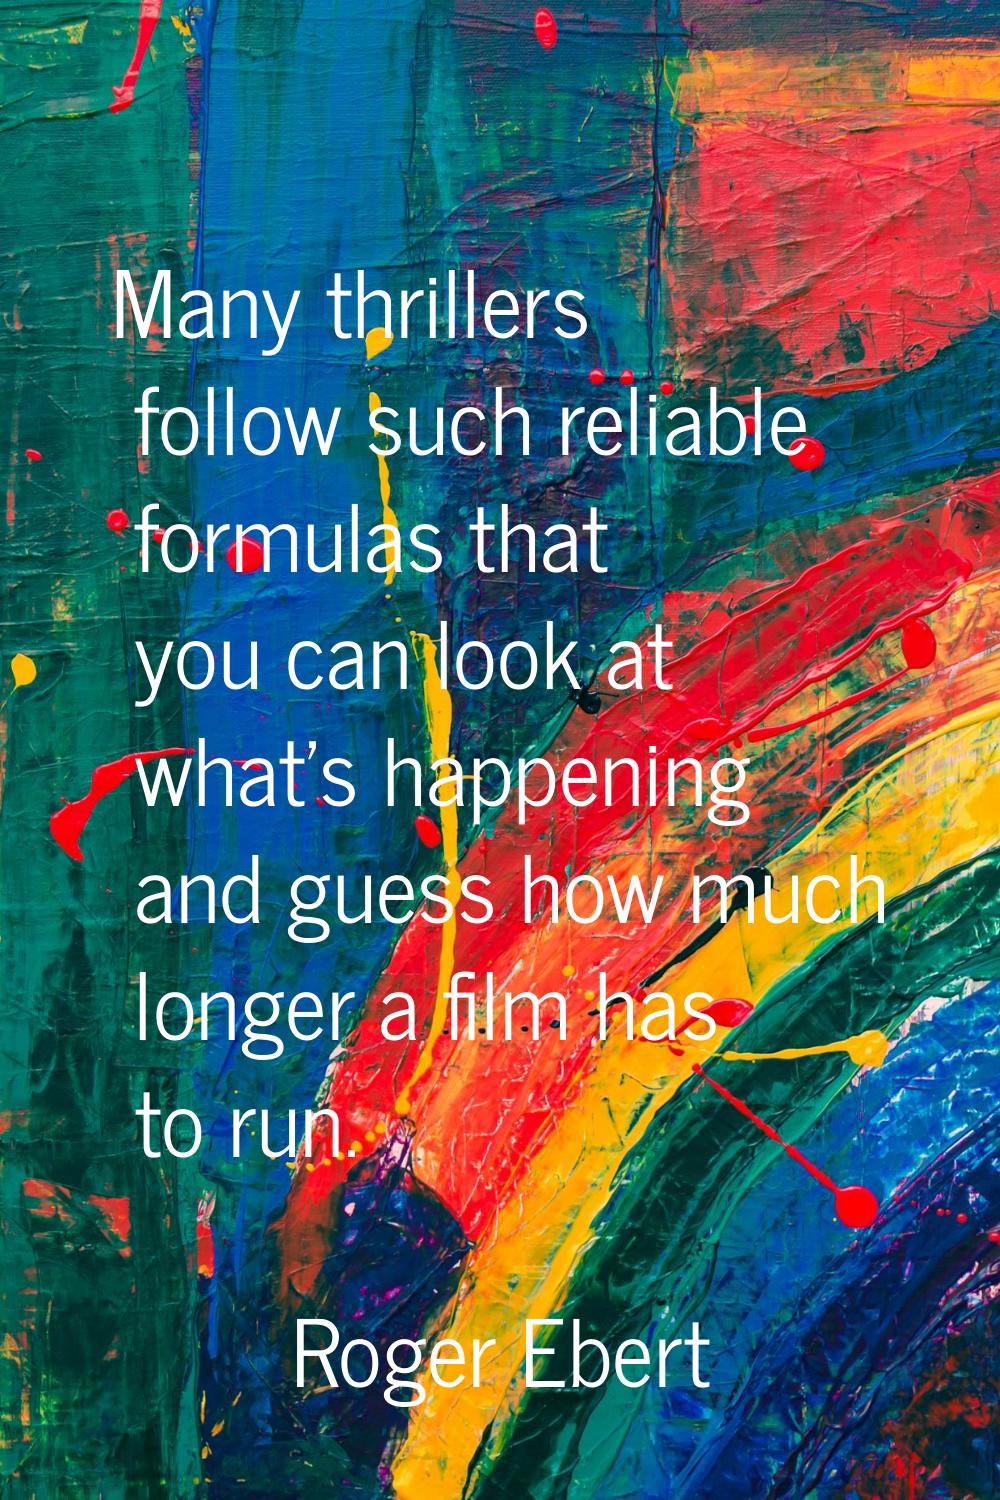 Many thrillers follow such reliable formulas that you can look at what's happening and guess how mu